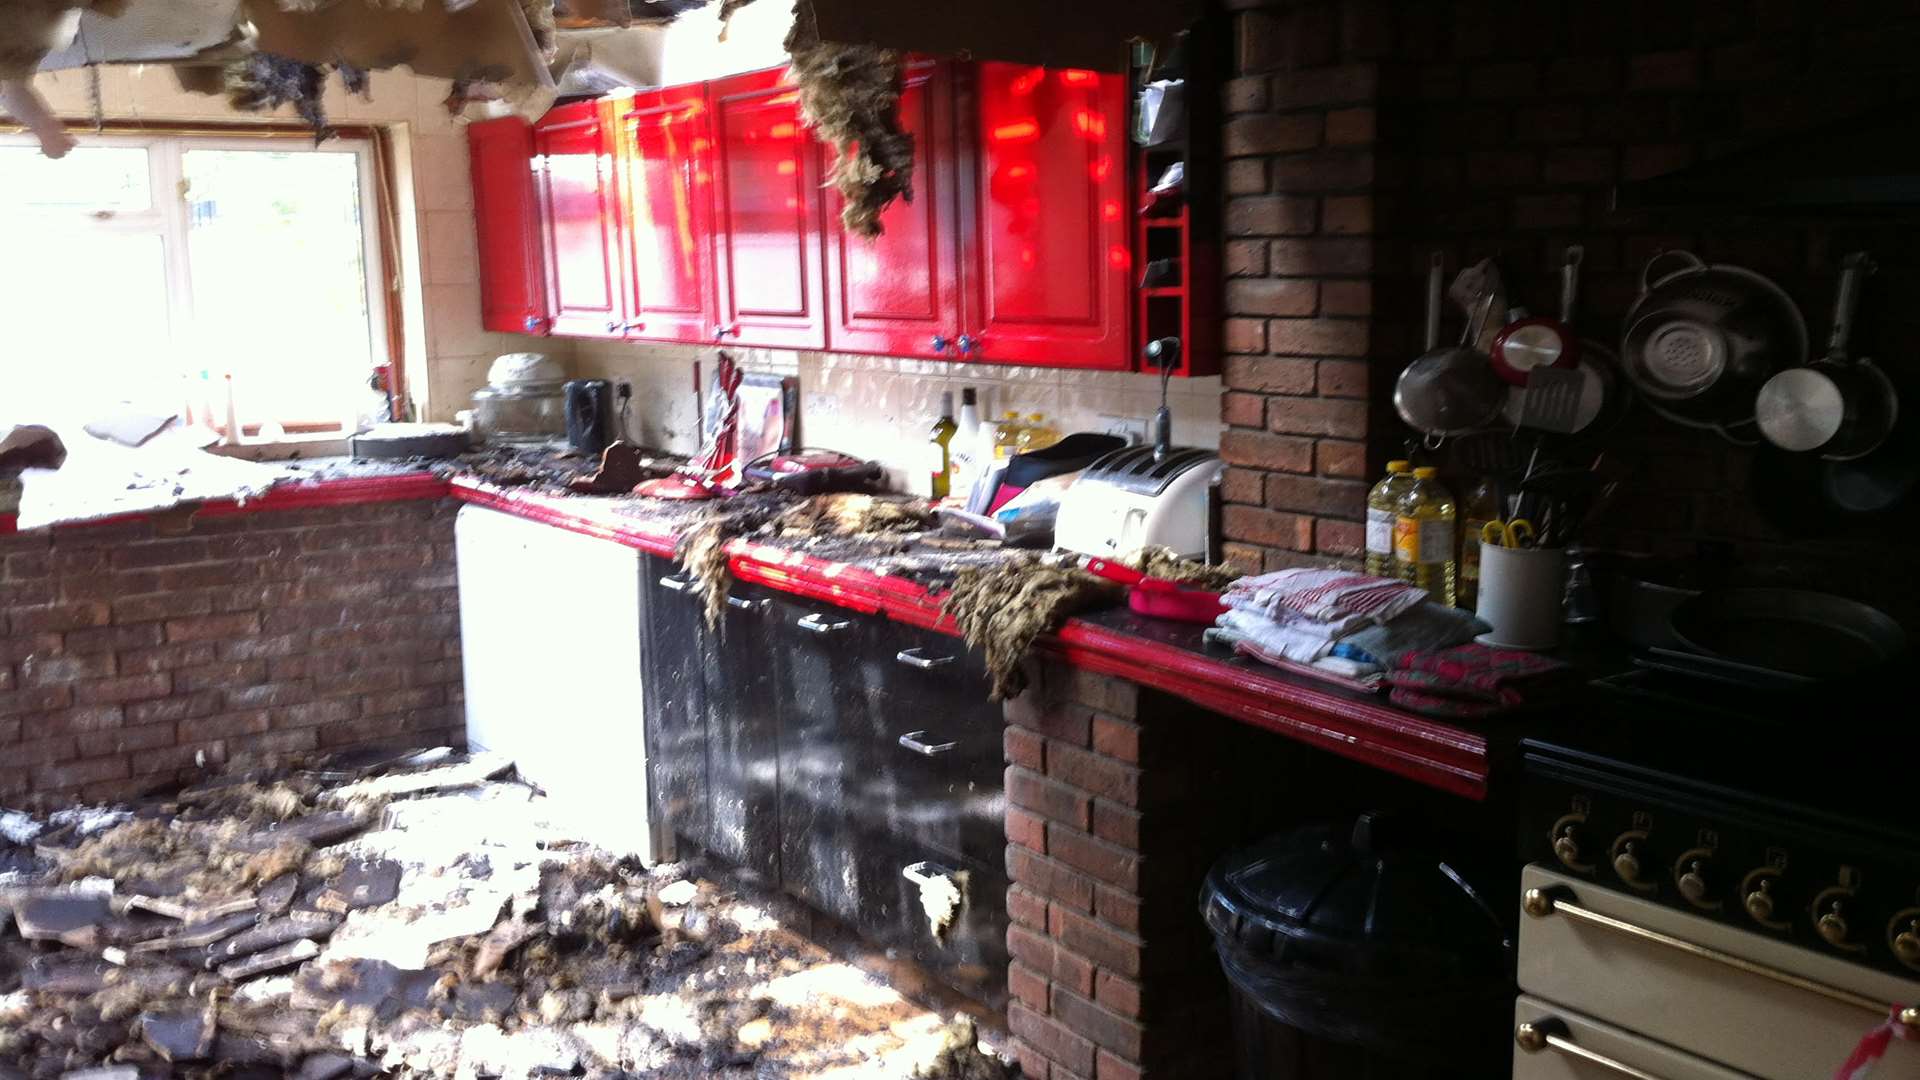 The fire destroyed the kitchen of the house next door